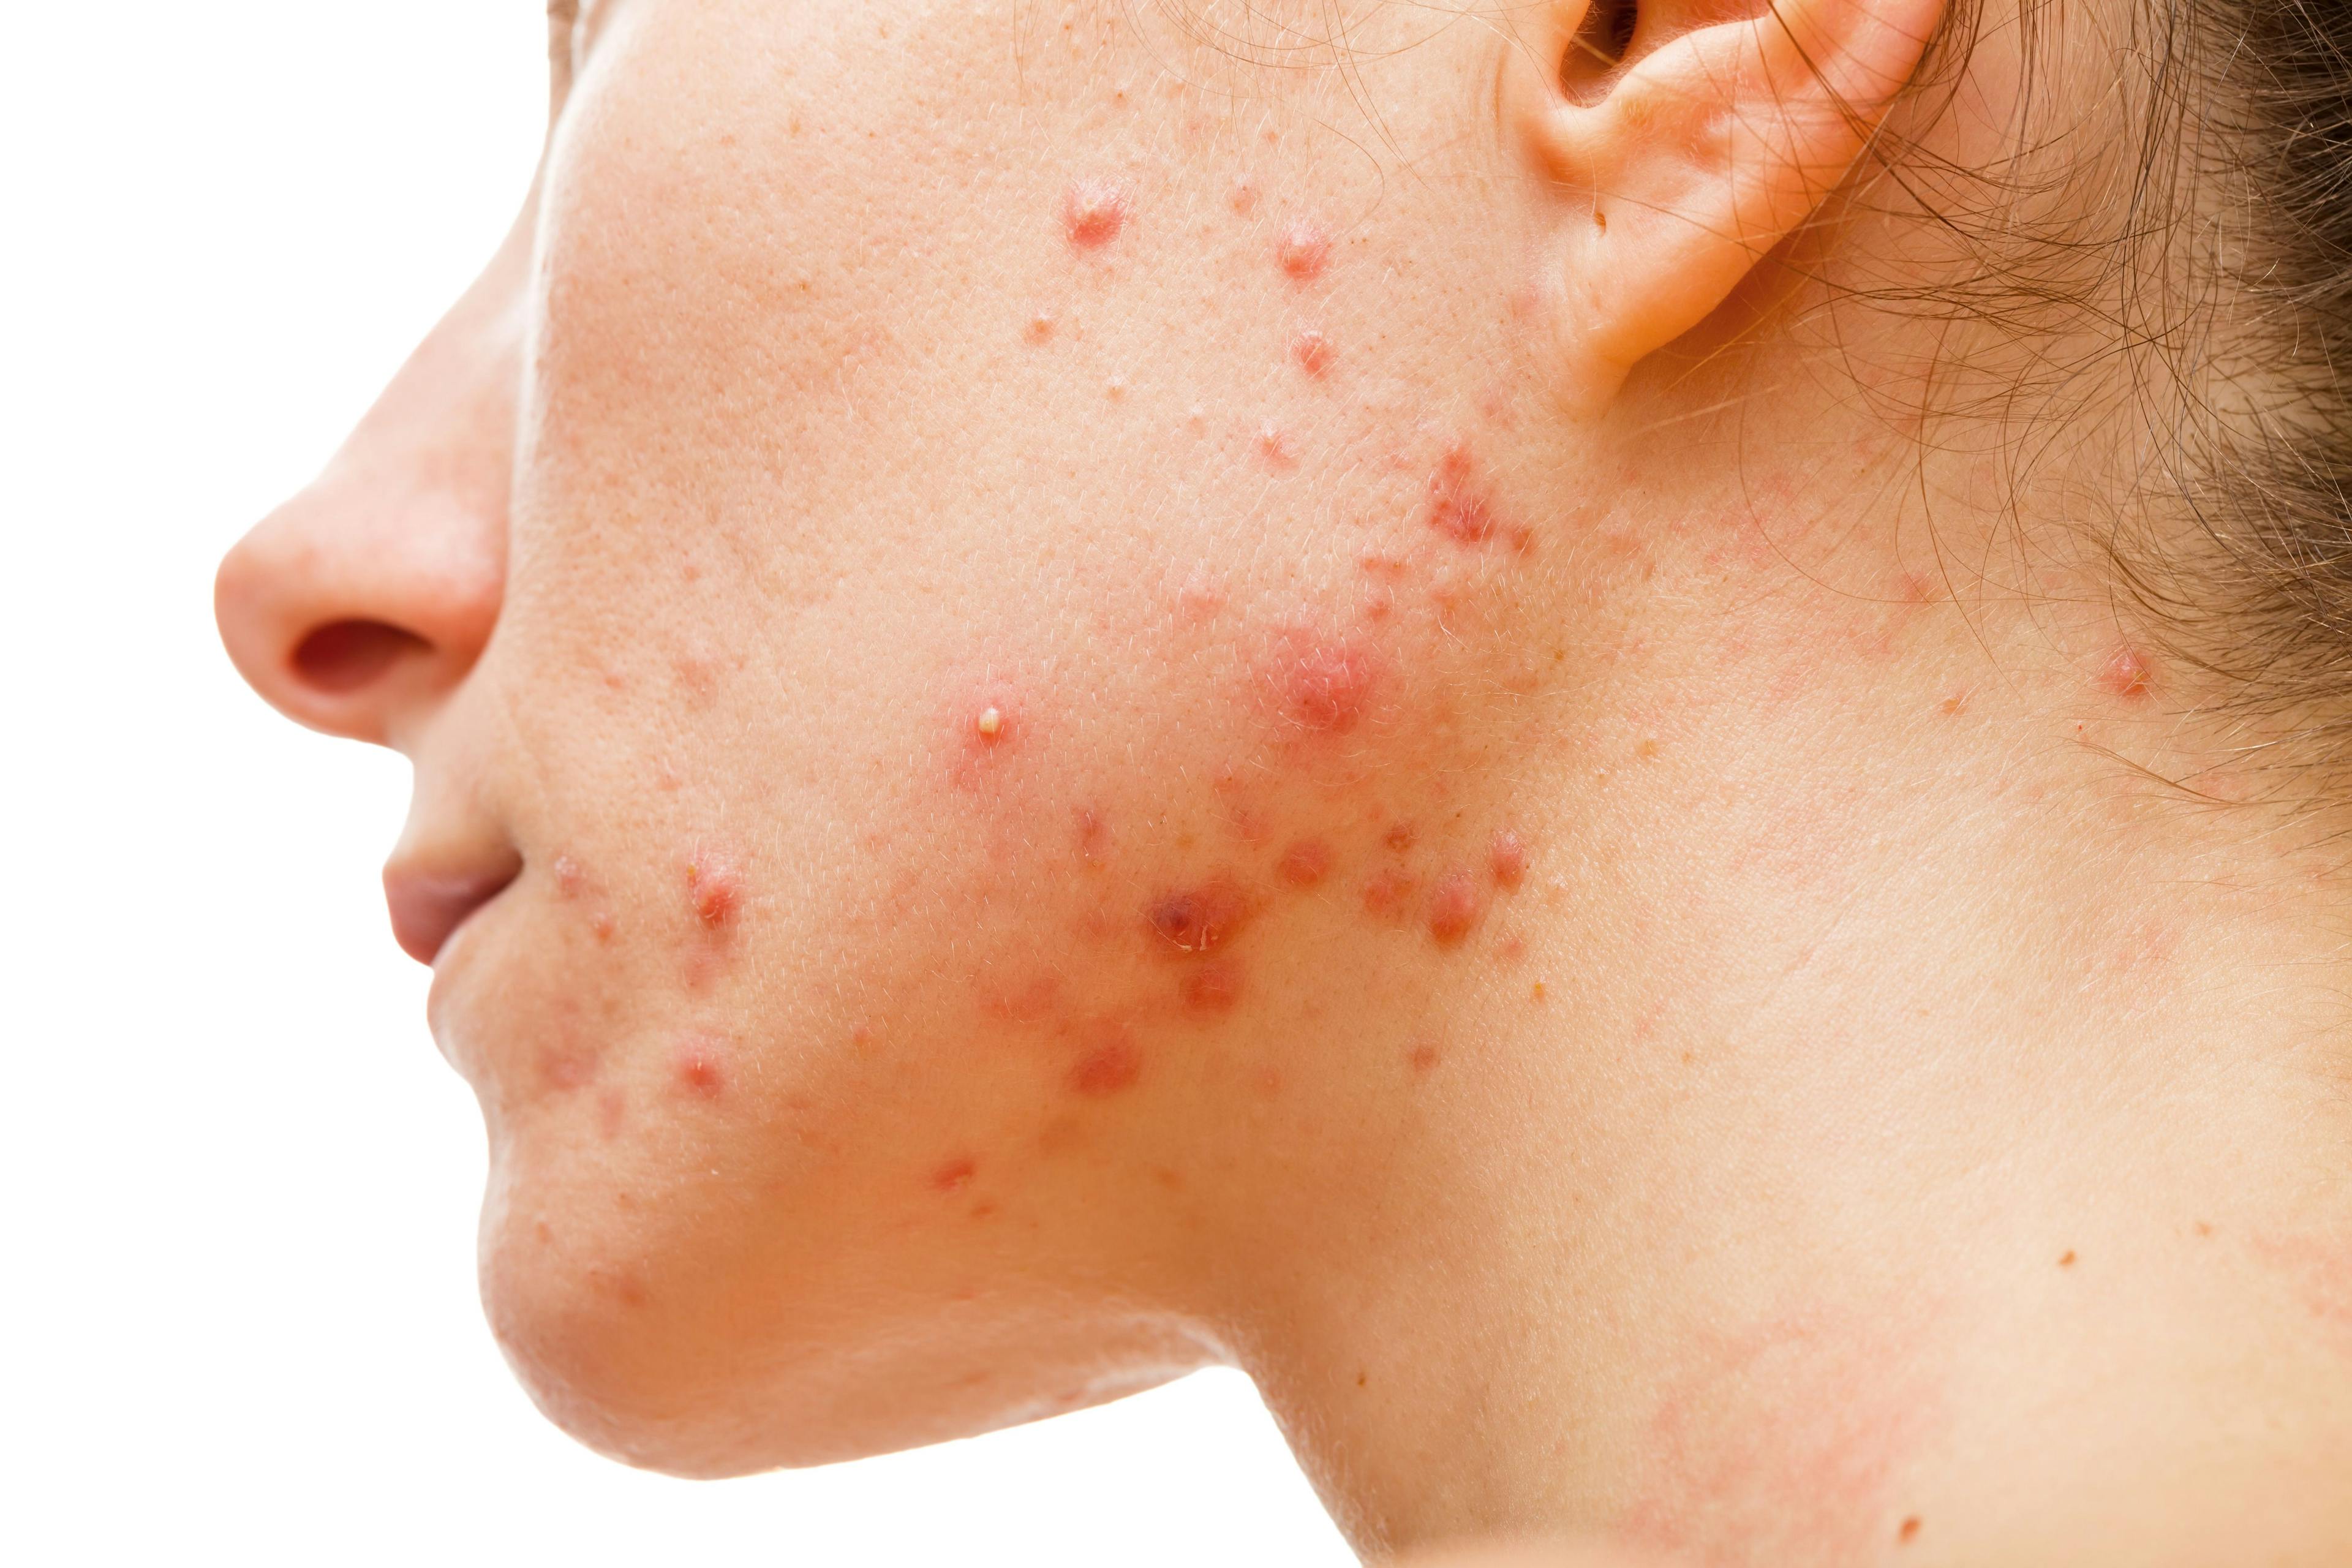 Metformin and Doxycycline Demonstrate Equal Efficacy in Acne Treatment